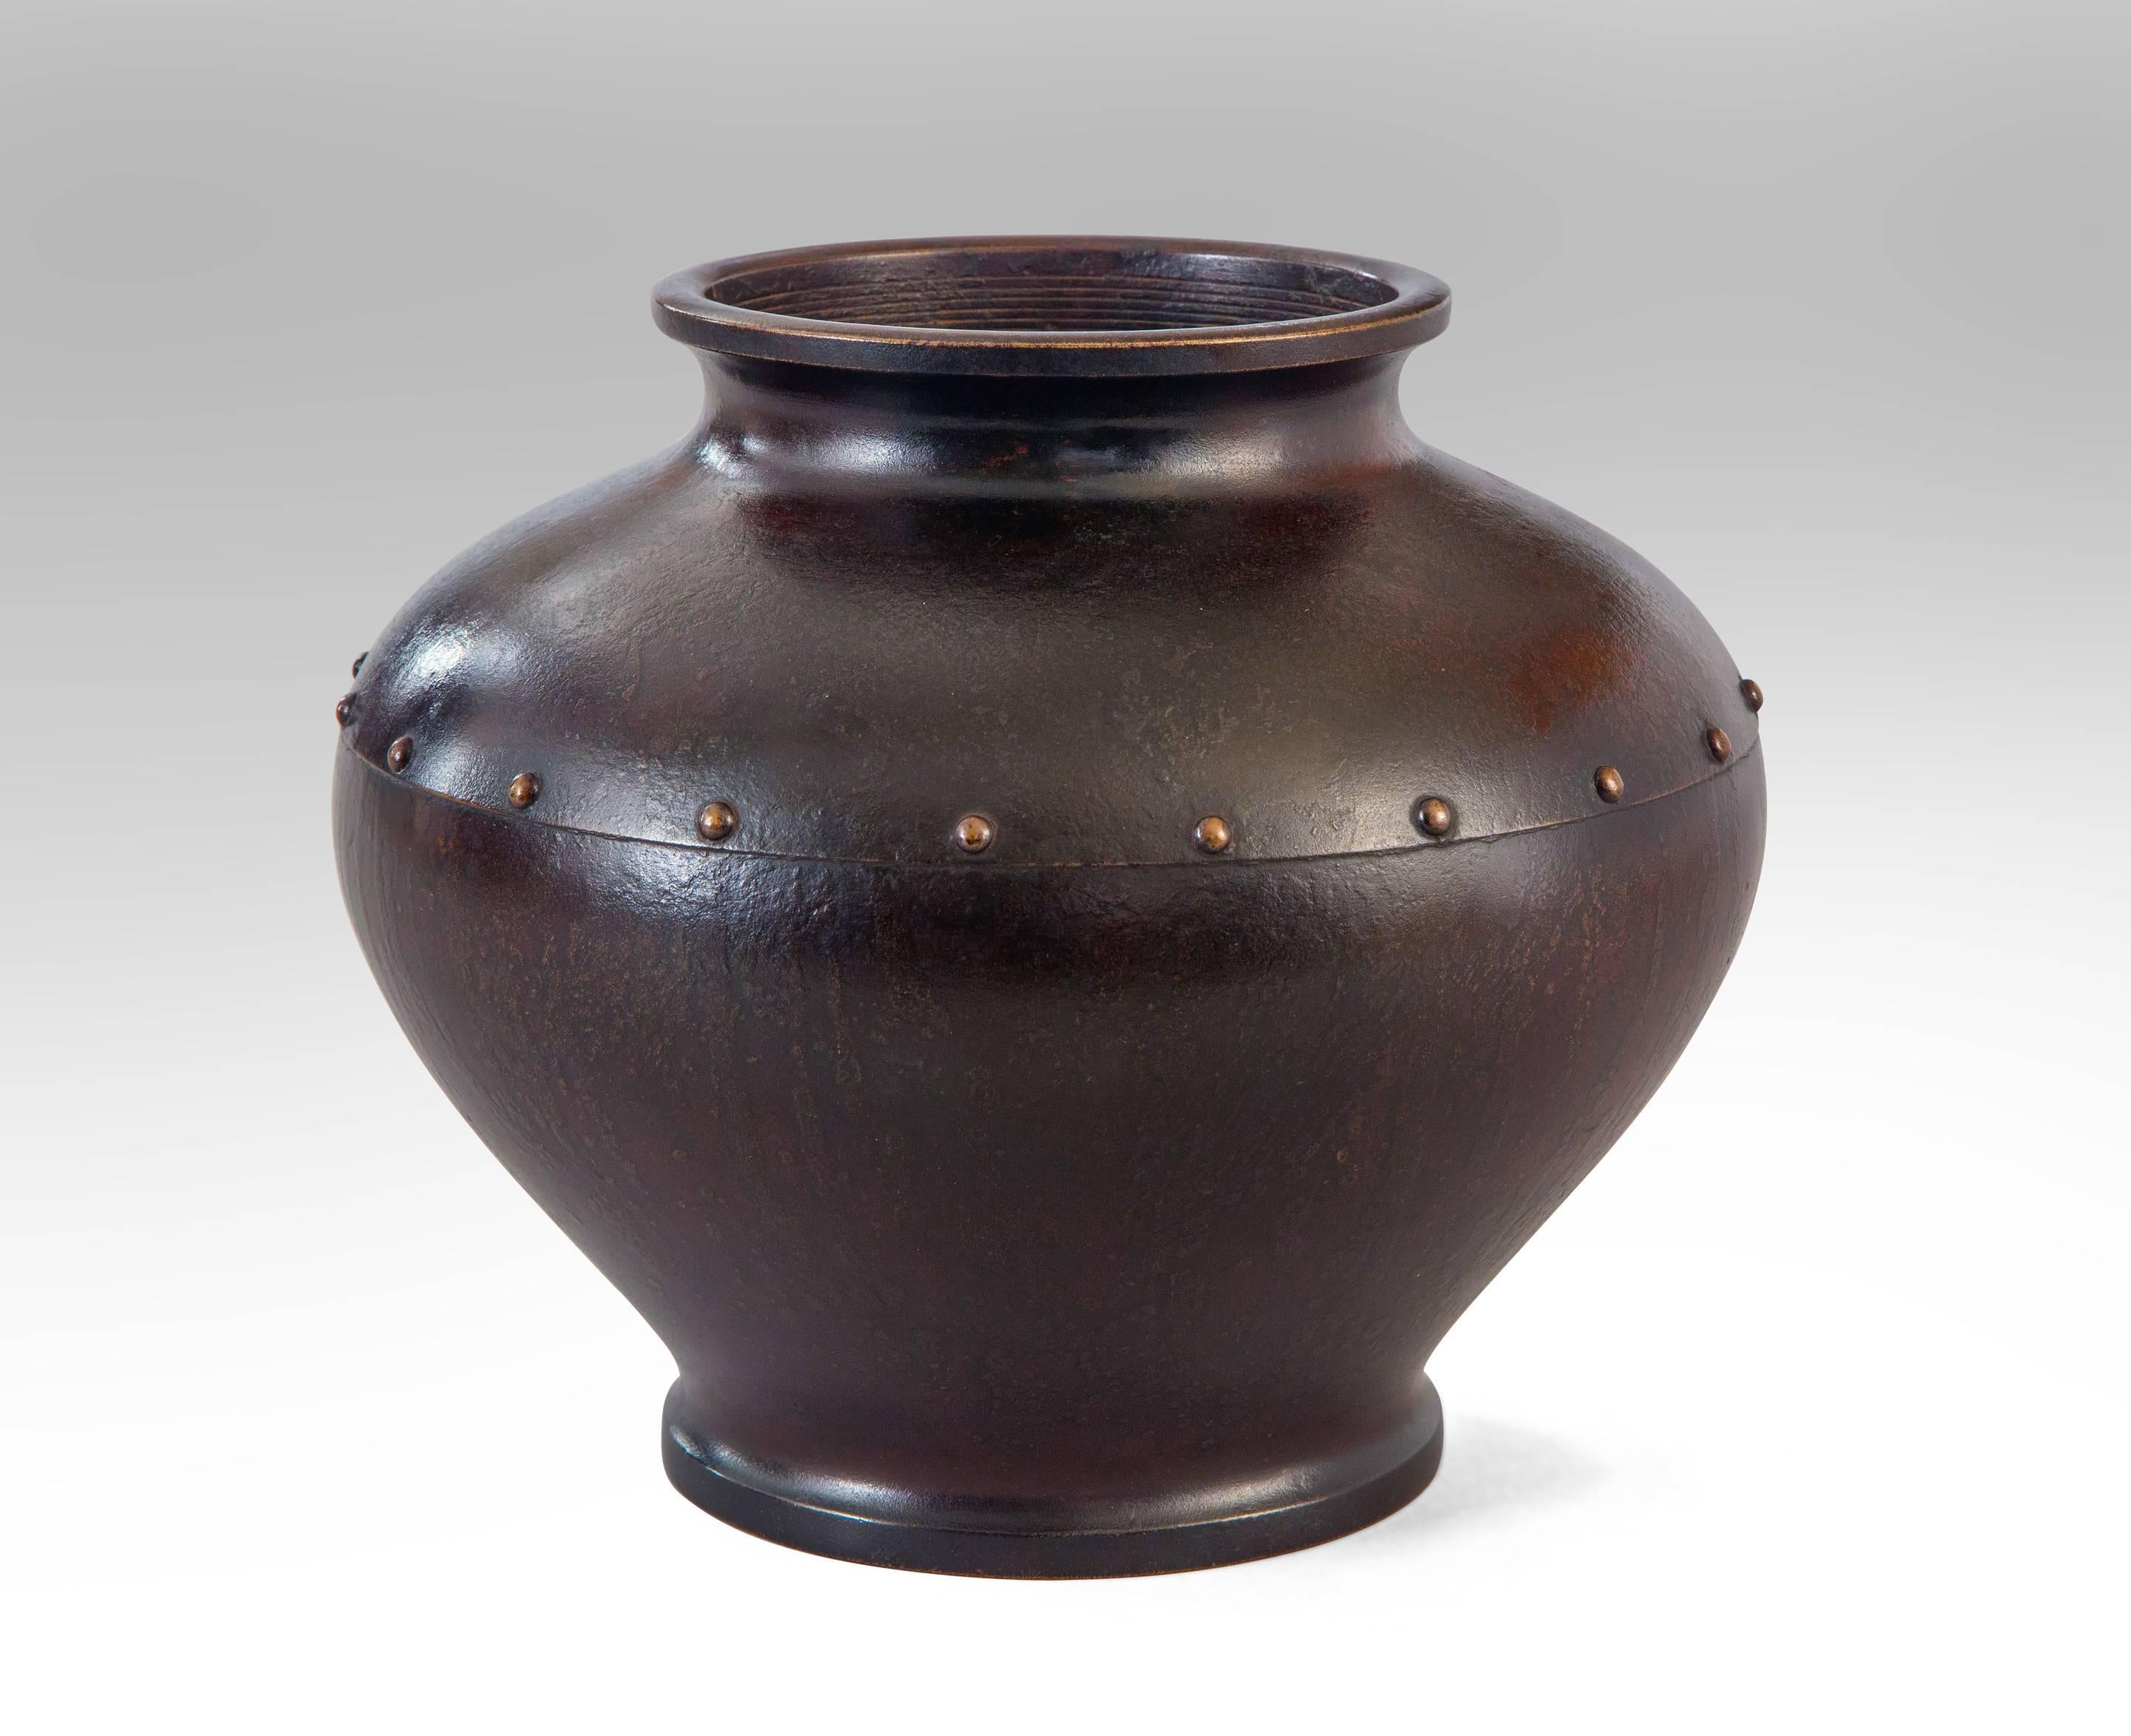 A highly unusual form simulating riveted construction.The circular flared mouth, above a jar form body divided by a line of studs, terminating in a circular foot, enhanced with a rich green brown patination throughout.

This Japanese Bronze Vase in